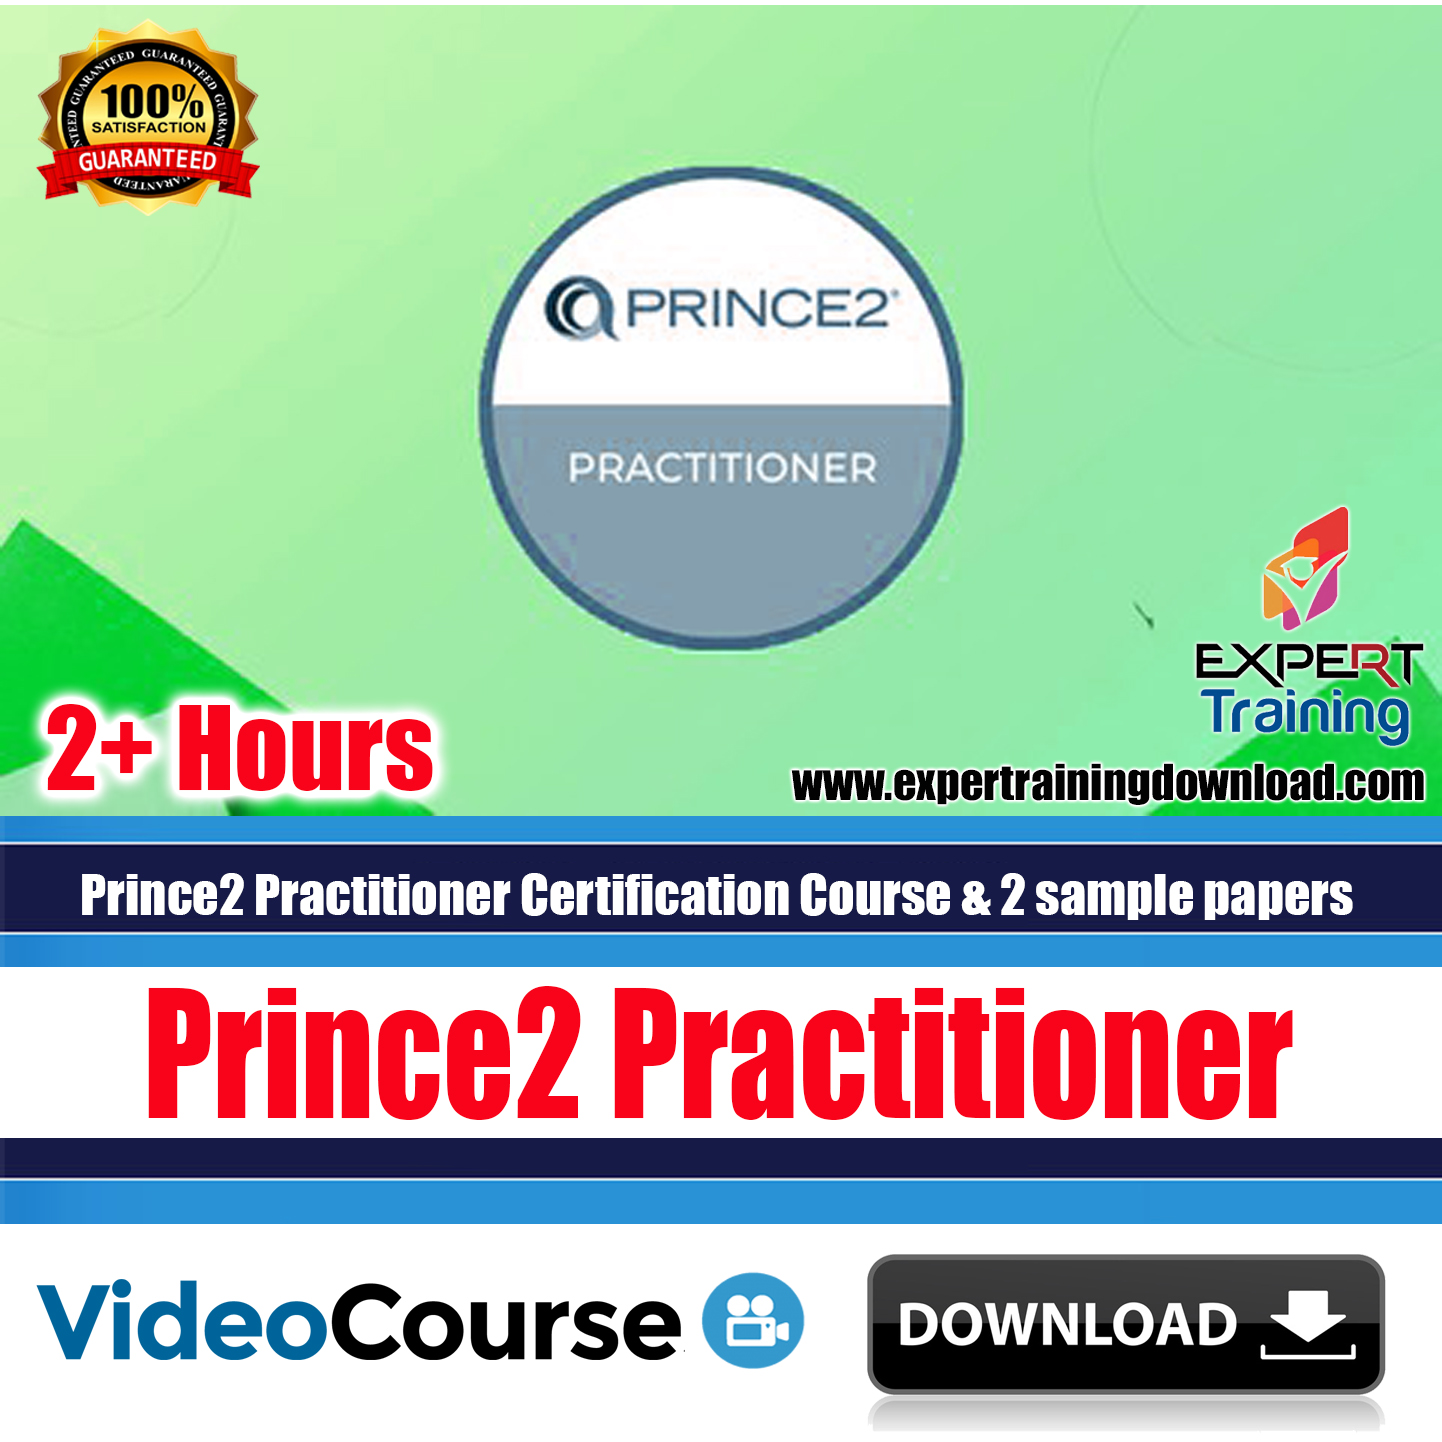 Prince2 Practitioner Certification Course & 2 sample papers